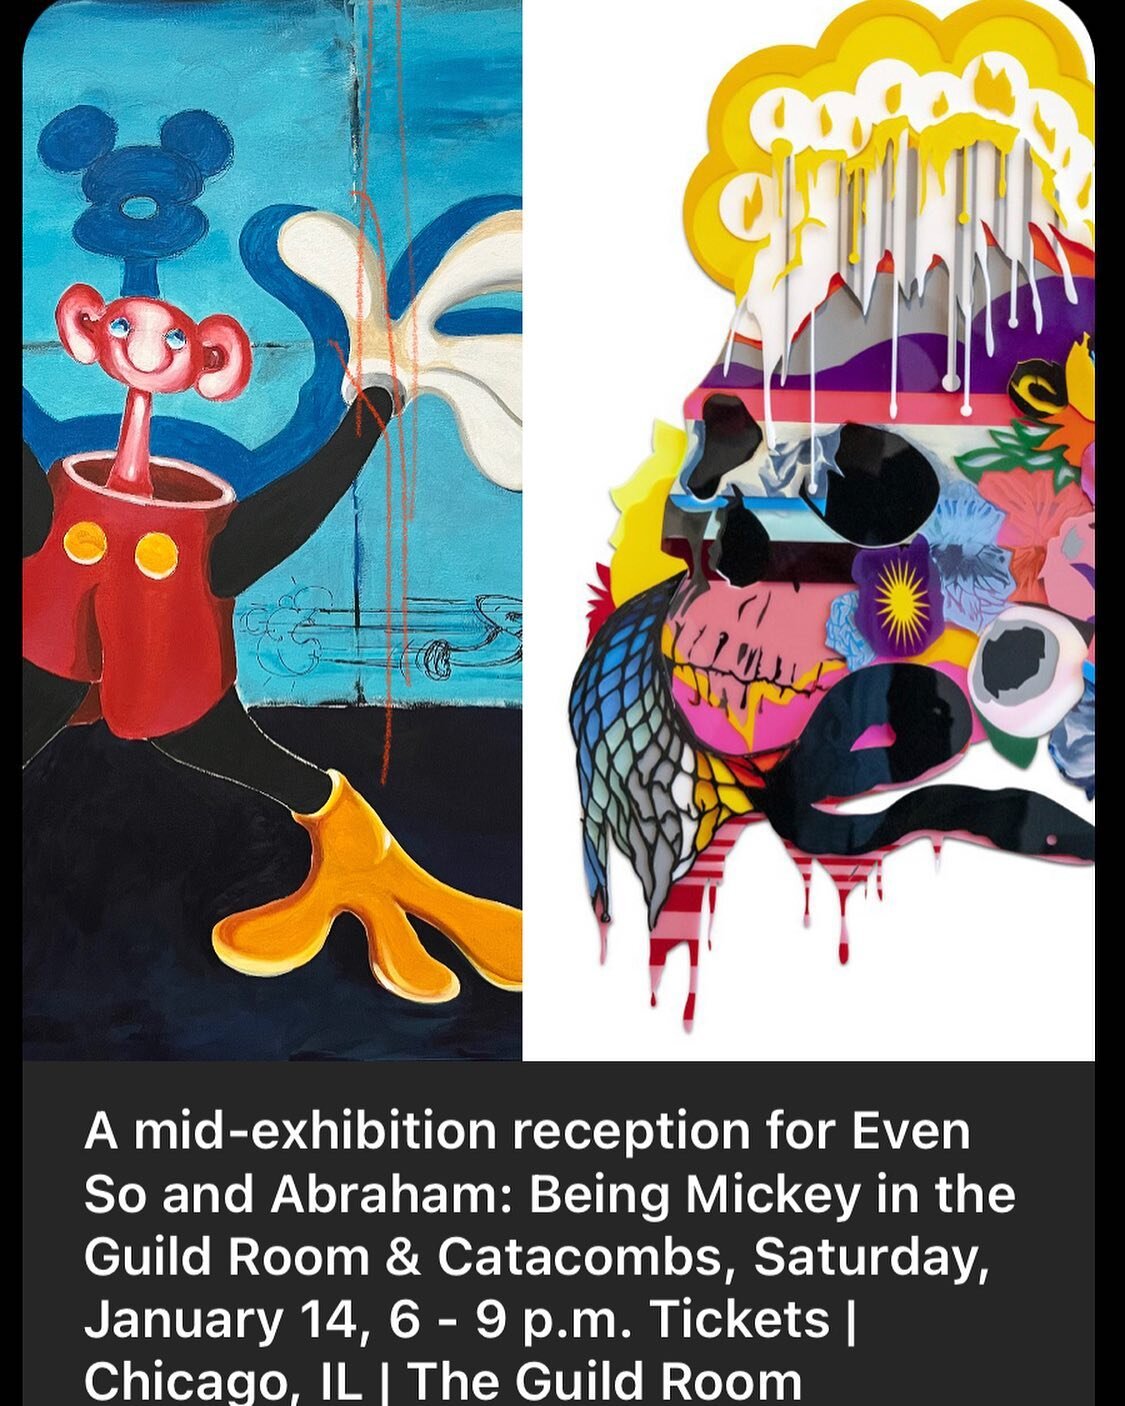 Good Morning my people! I just wanted to let you know that group show I curated &ldquo;Even So&rdquo; at the beautiful @epiphanyarts201 is having a mid exhibition viewing along with the &ldquo;Abraham: Being Mickey&rdquo; curated by @elephantroomgall